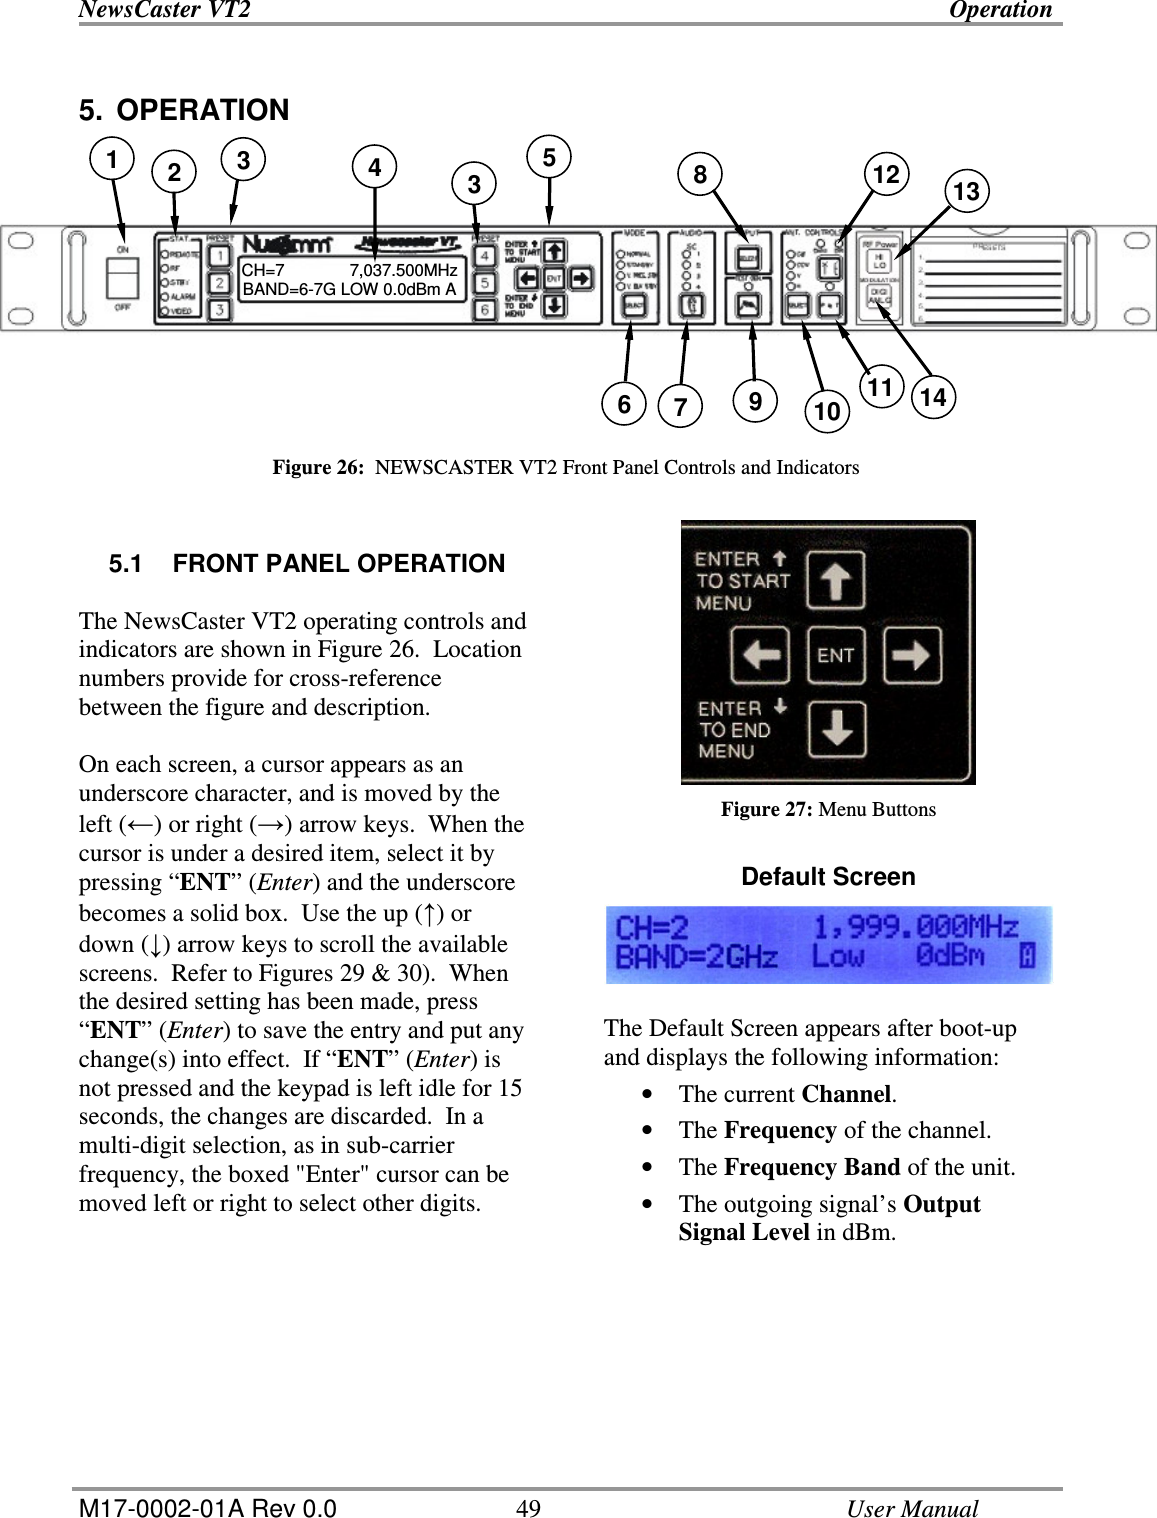 NewsCaster VT2    Operation  M17-0002-01A Rev 0.0  49    User Manual 5.  OPERATION            Figure 26:  NEWSCASTER VT2 Front Panel Controls and Indicators   5.1  FRONT PANEL OPERATION  The NewsCaster VT2 operating controls and indicators are shown in Figure 26.  Location numbers provide for cross-reference between the figure and description.  On each screen, a cursor appears as an underscore character, and is moved by the left () or right () arrow keys.  When the cursor is under a desired item, select it by pressing “ENT” (Enter) and the underscore becomes a solid box.  Use the up () or down () arrow keys to scroll the available screens.  Refer to Figures 29 &amp; 30).  When the desired setting has been made, press “ENT” (Enter) to save the entry and put any change(s) into effect.  If “ENT” (Enter) is not pressed and the keypad is left idle for 15 seconds, the changes are discarded.  In a multi-digit selection, as in sub-carrier frequency, the boxed &quot;Enter&quot; cursor can be moved left or right to select other digits.     Figure 27: Menu Buttons  Default Screen   The Default Screen appears after boot-up and displays the following information: • The current Channel. • The Frequency of the channel. • The Frequency Band of the unit. • The outgoing signal’s Output Signal Level in dBm.    CH=7              7,037.500MHz       BAND=6-7G LOW 0.0dBm A  1  4 2  3  5  8 3  12  13 11 10 9 7 6  14 